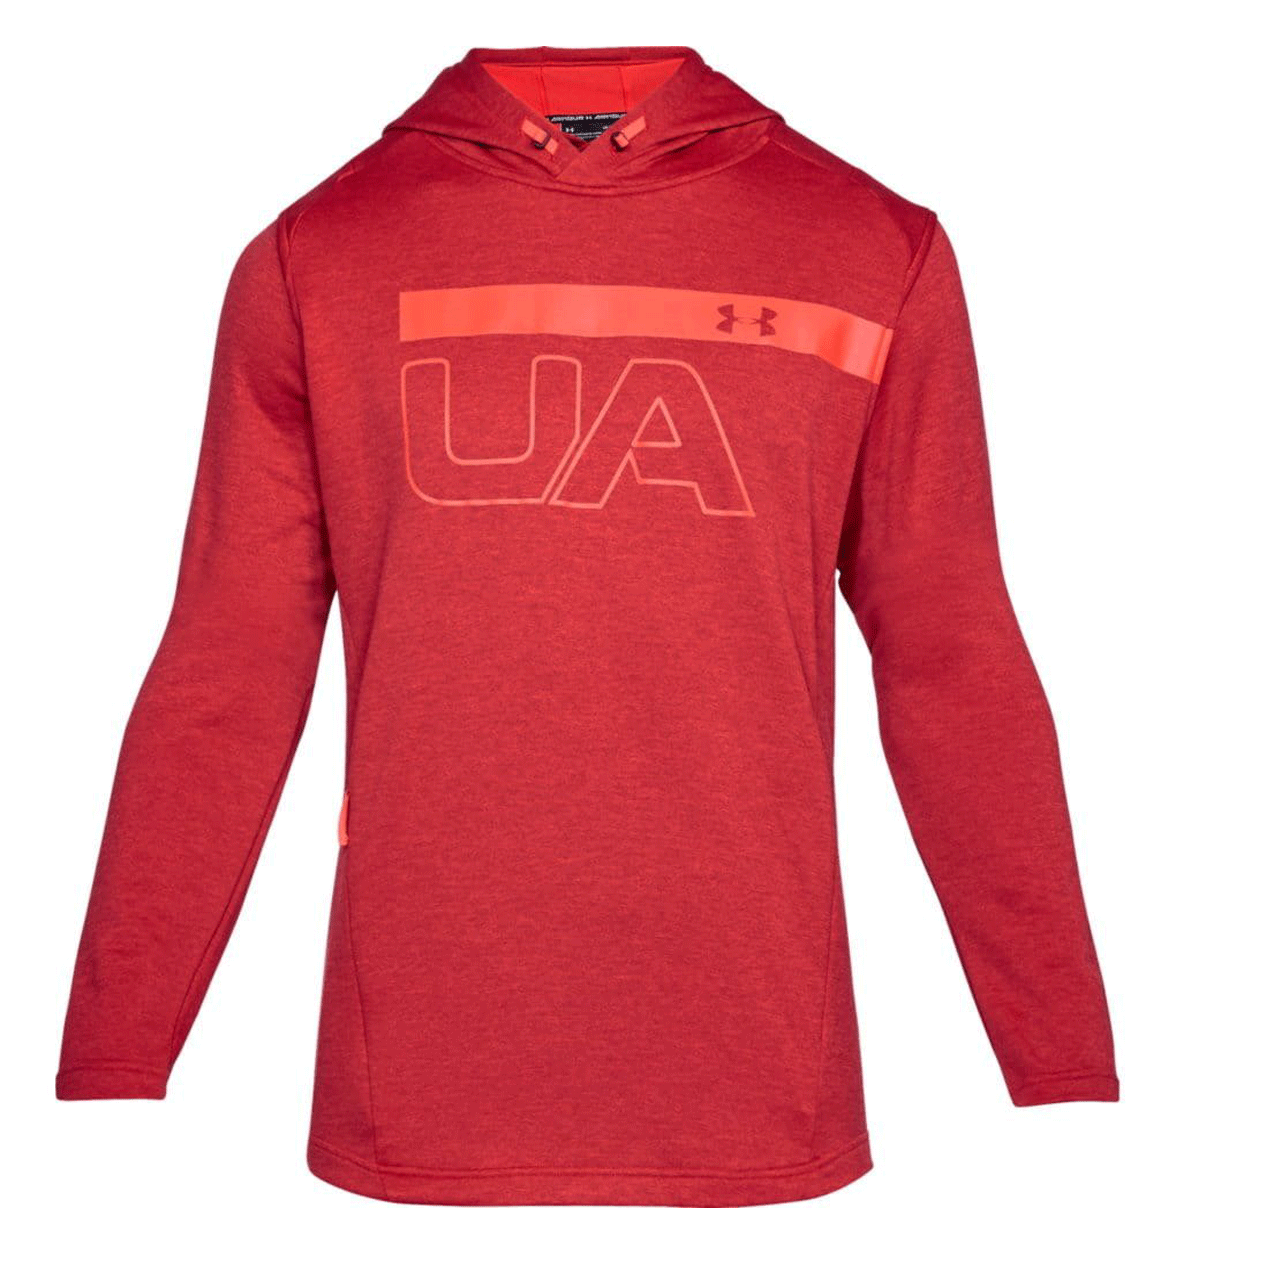 UNDER ARMOUR MK1 TERRY HOODY RED 1306445-629